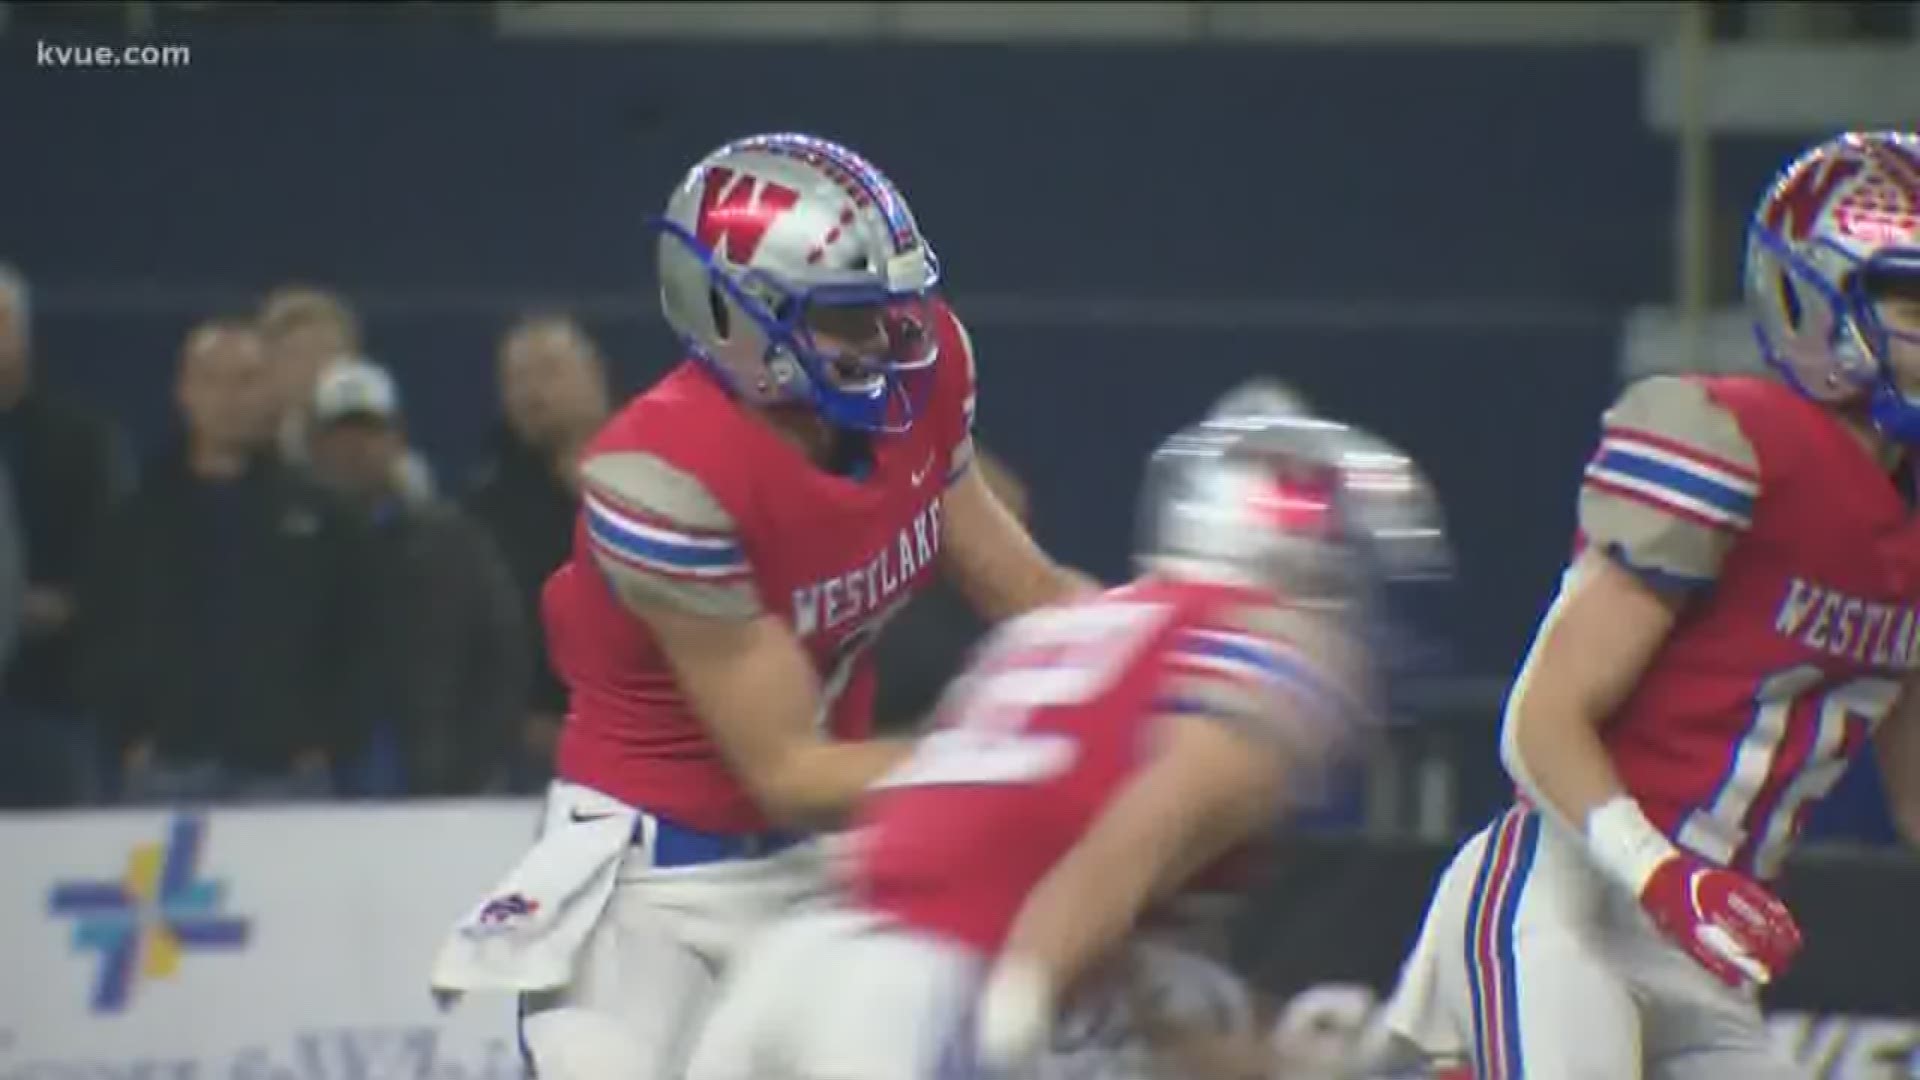 The Chaps won of their second UIL state championship in school history after defeating Denton Guyer, 24-0.